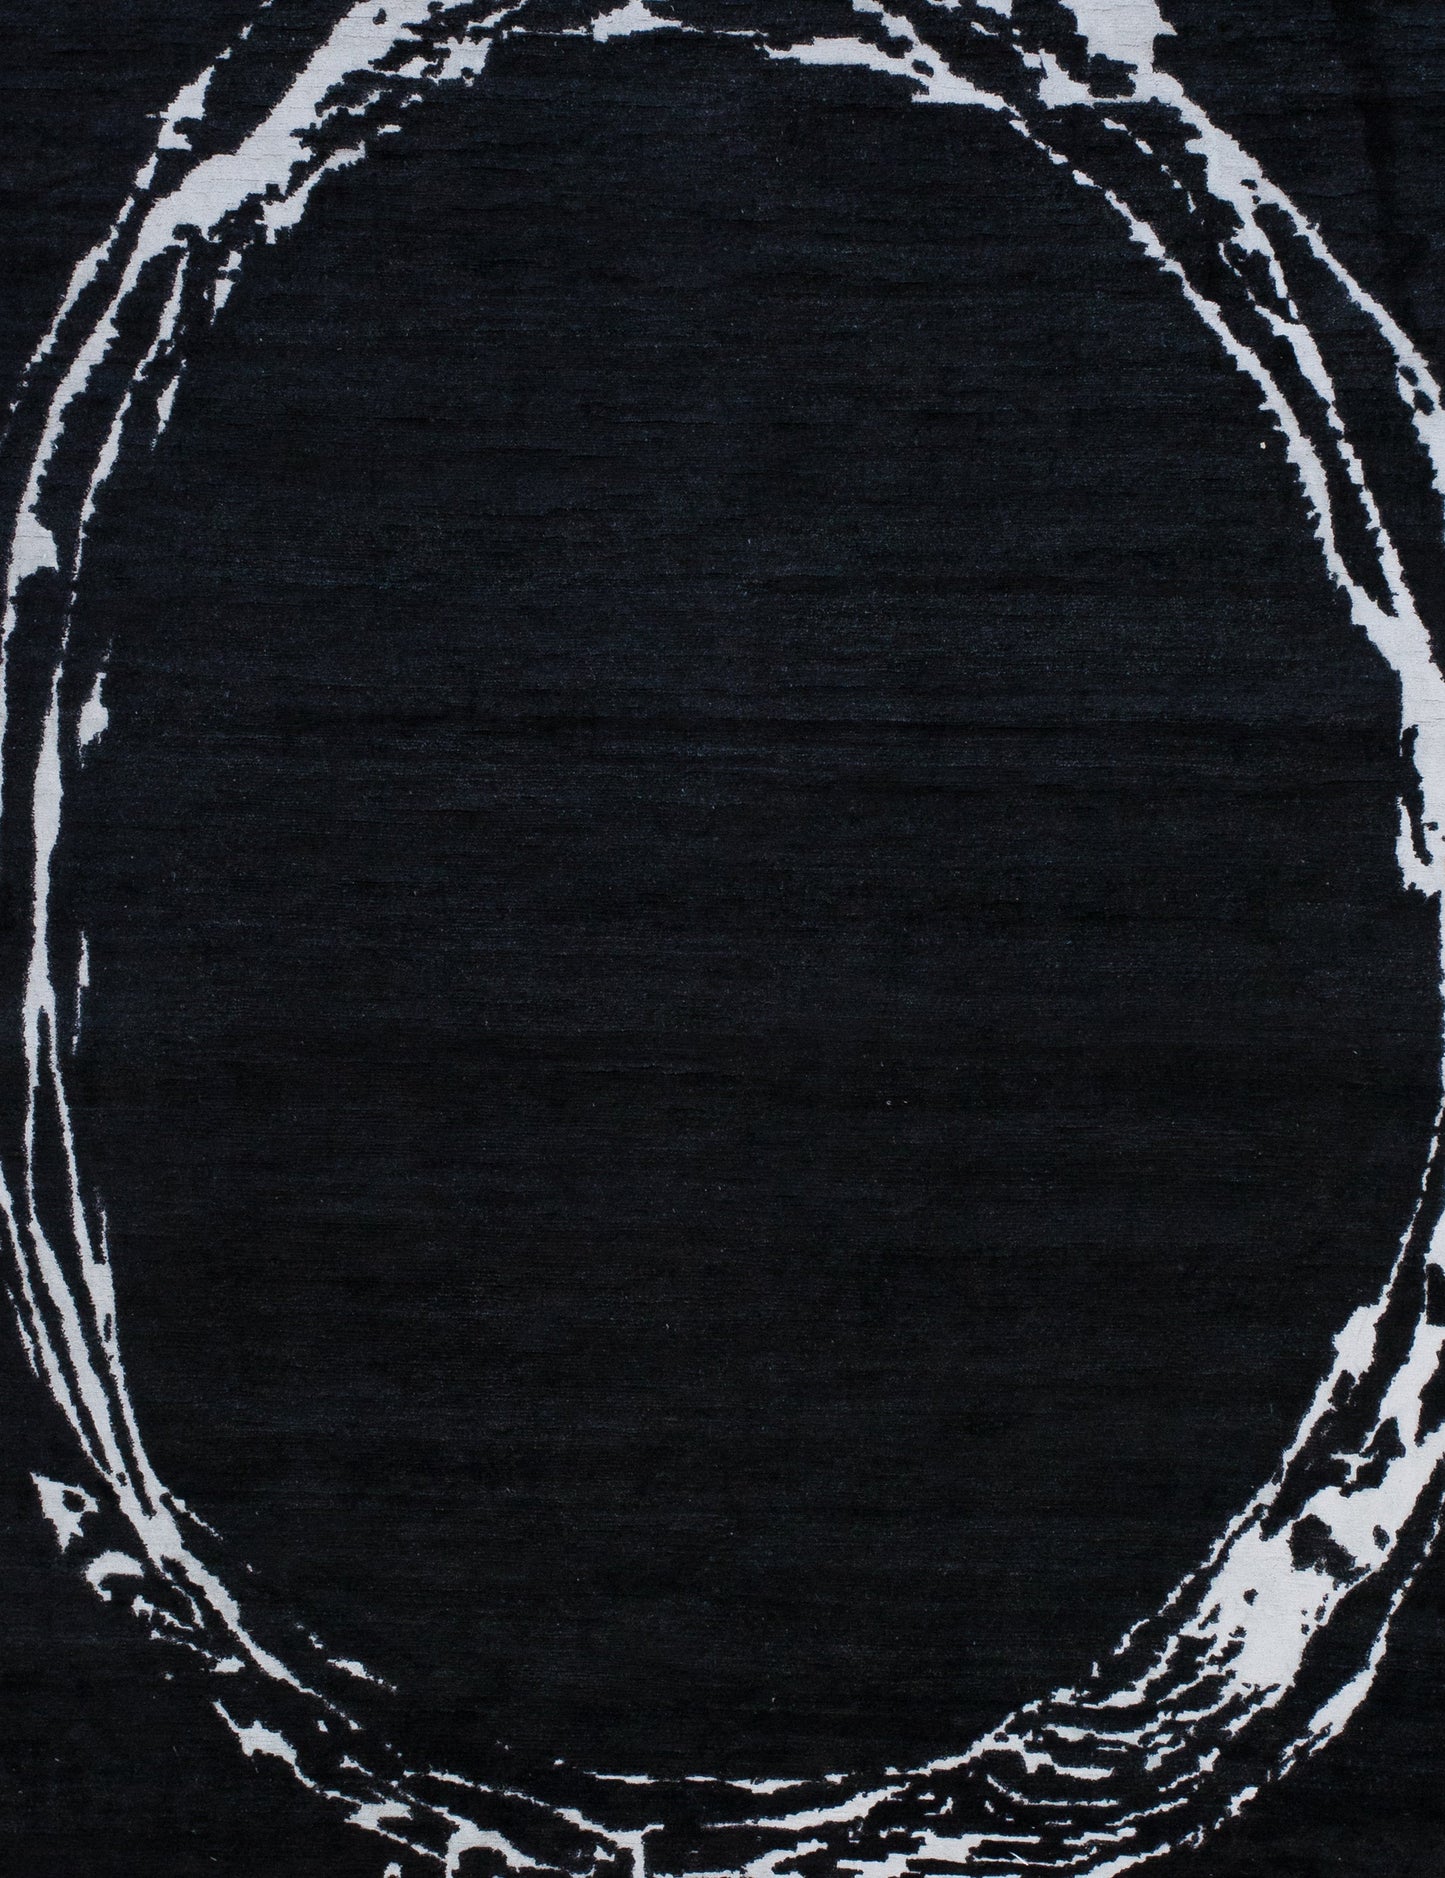 the center of the rug is black with the white ring enclosing it.